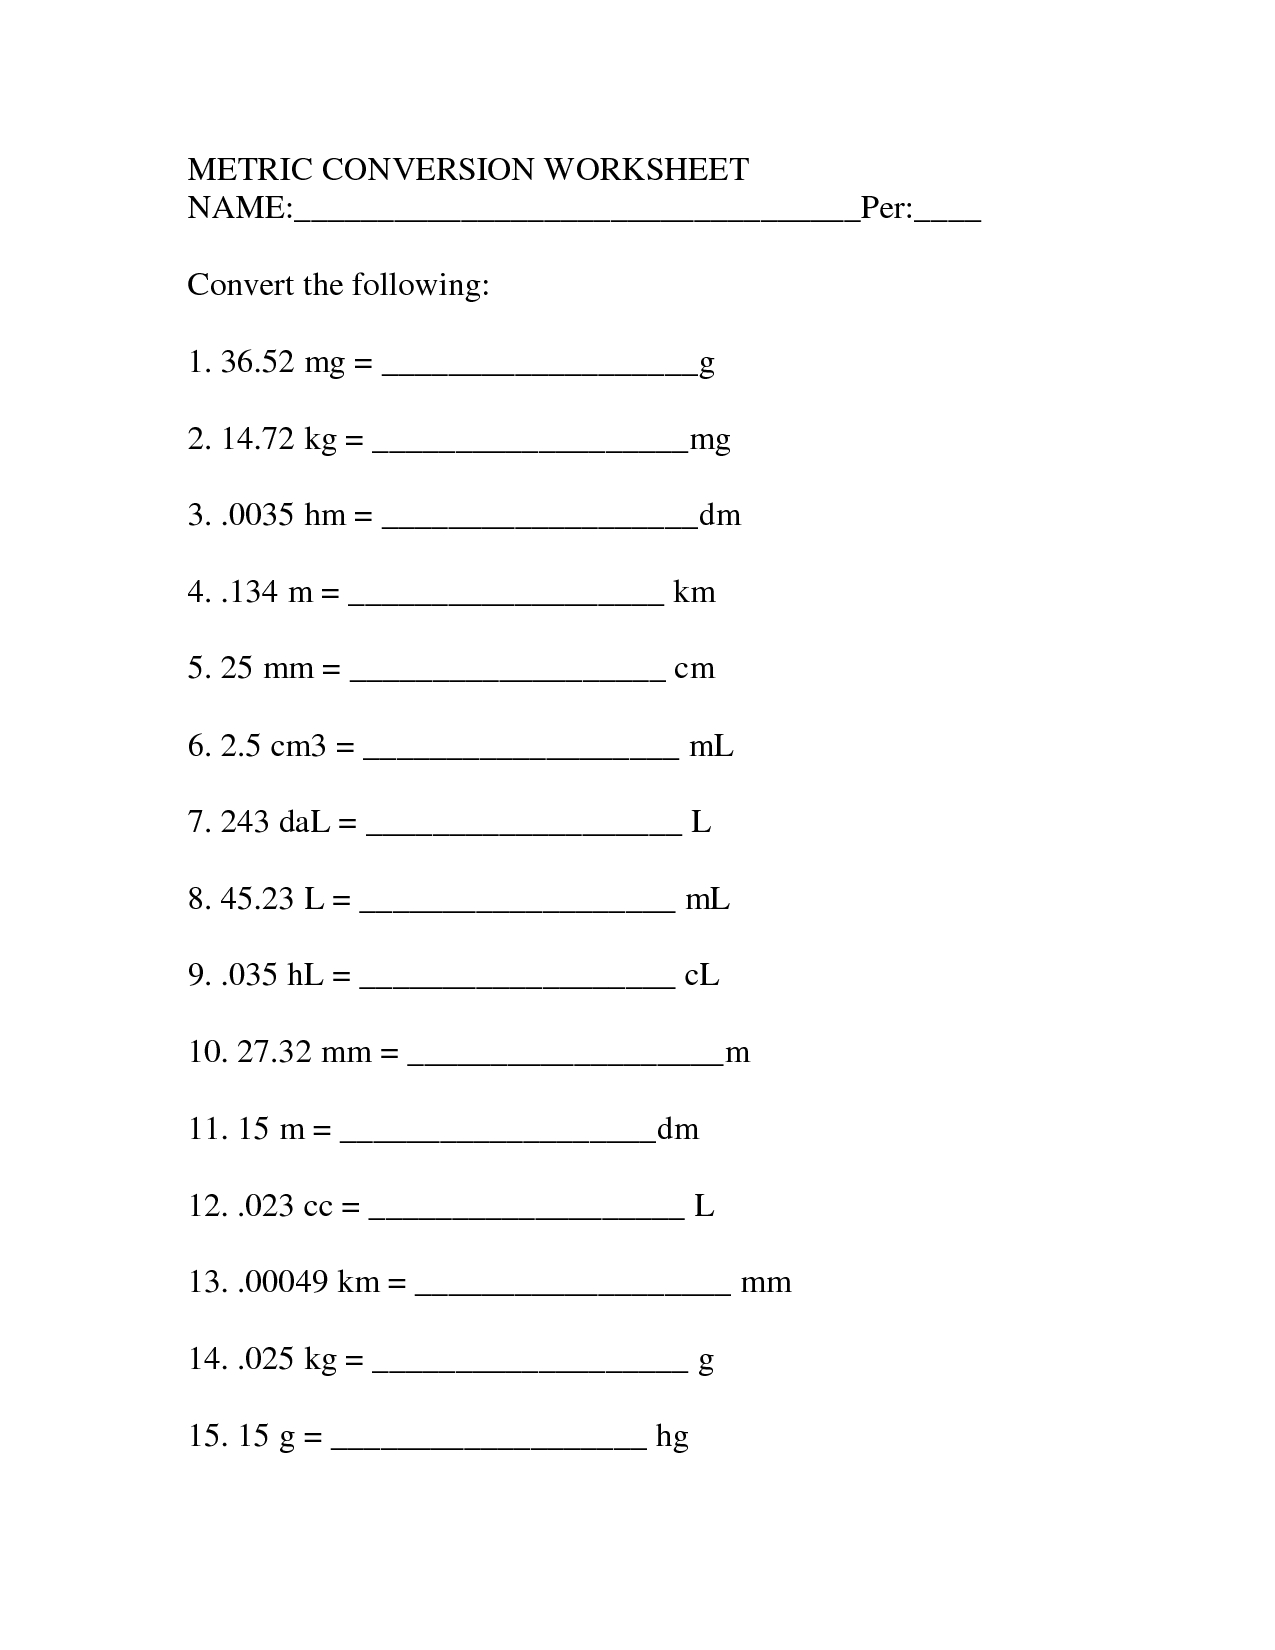 Unit Conversion Worksheets For Converting Metric si Area To Other 